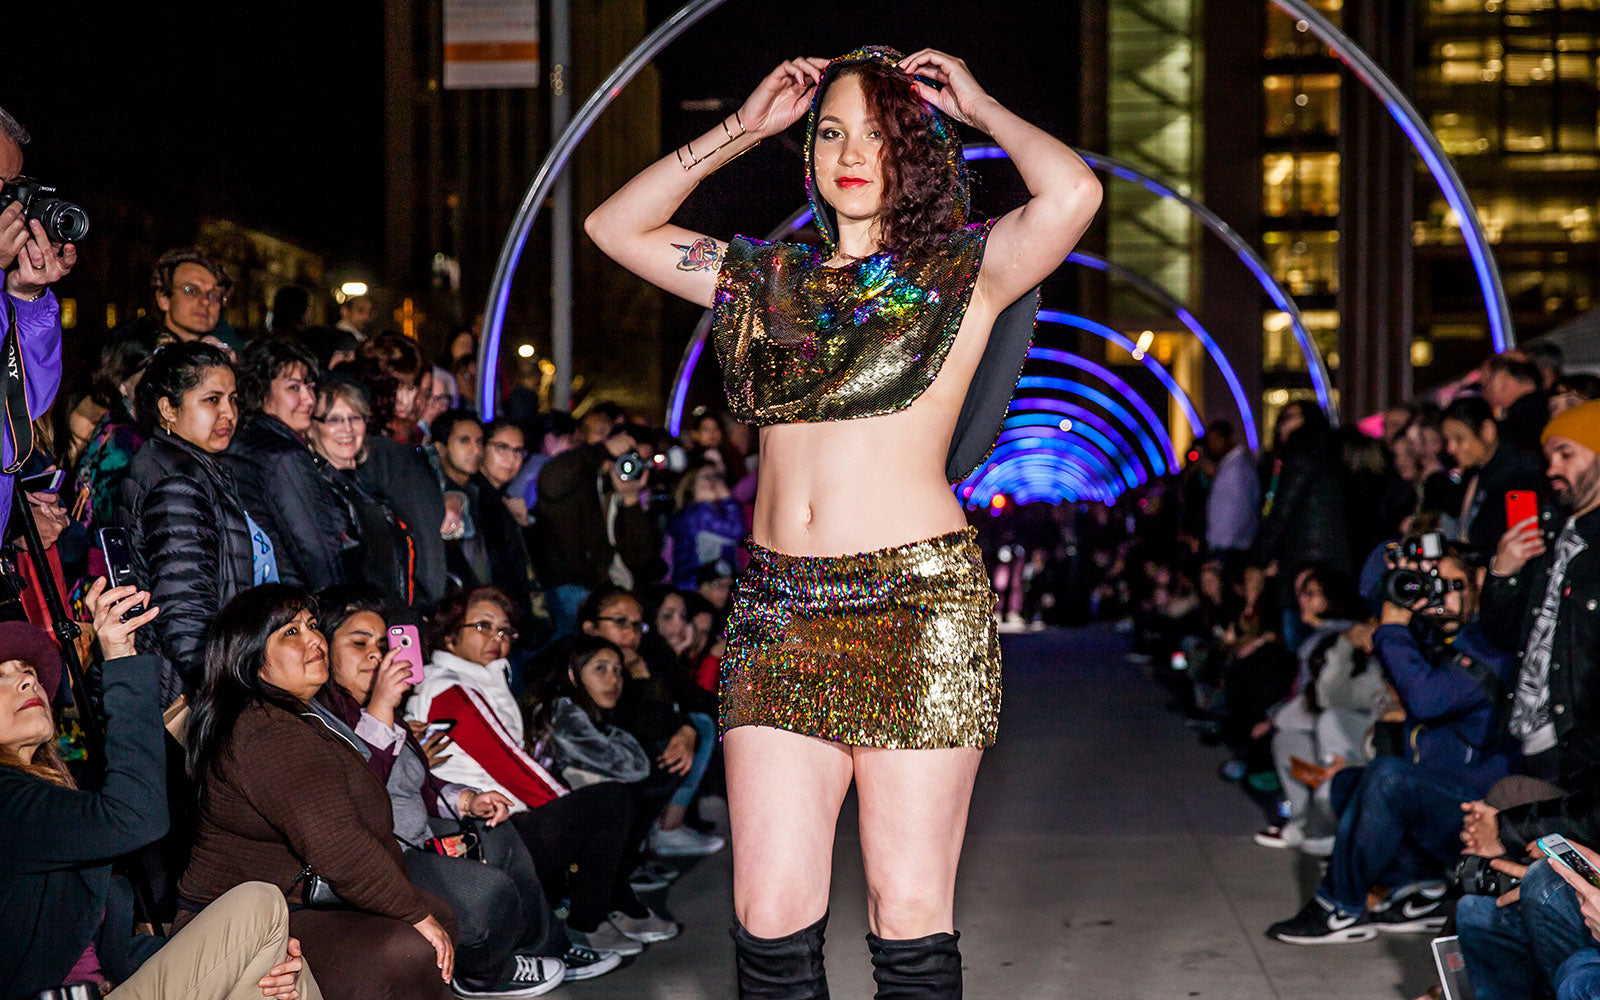 A Line Called K at the Sonic Runway March 2018 in San Jose